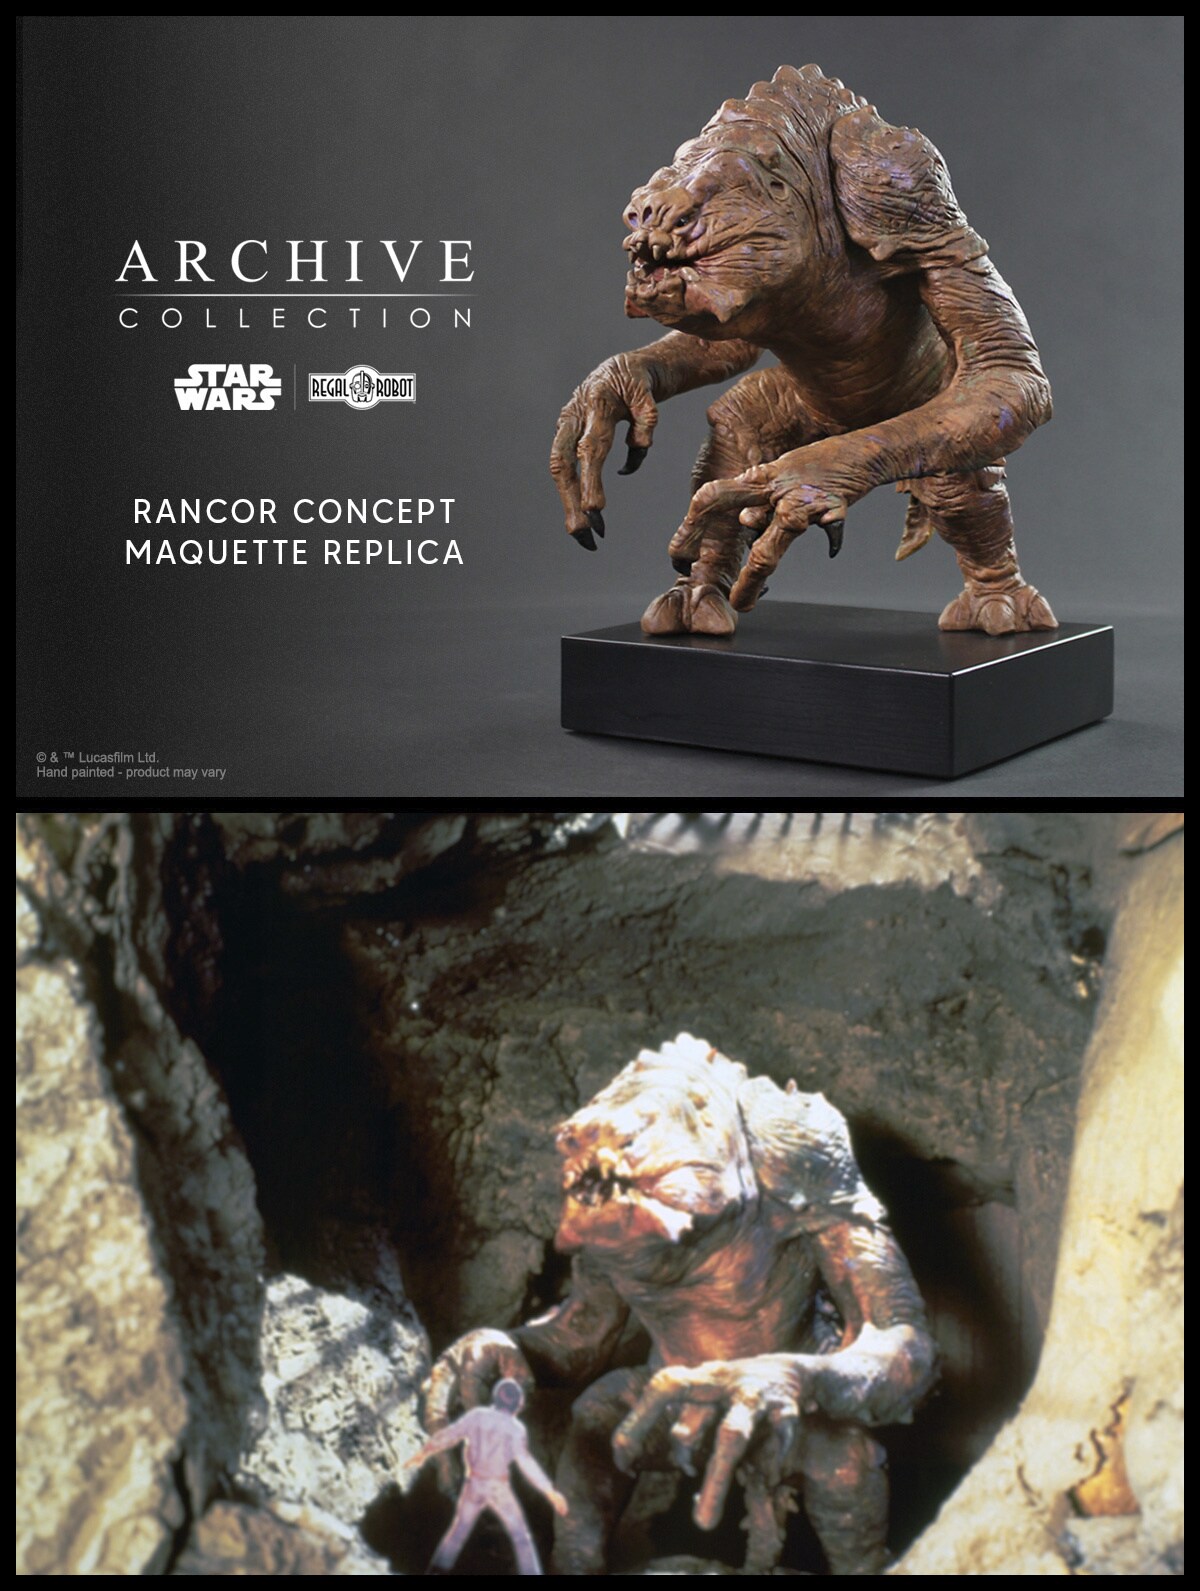 Regal Robot’s New Concept Maquette of the Rancor and the sculpture in scene